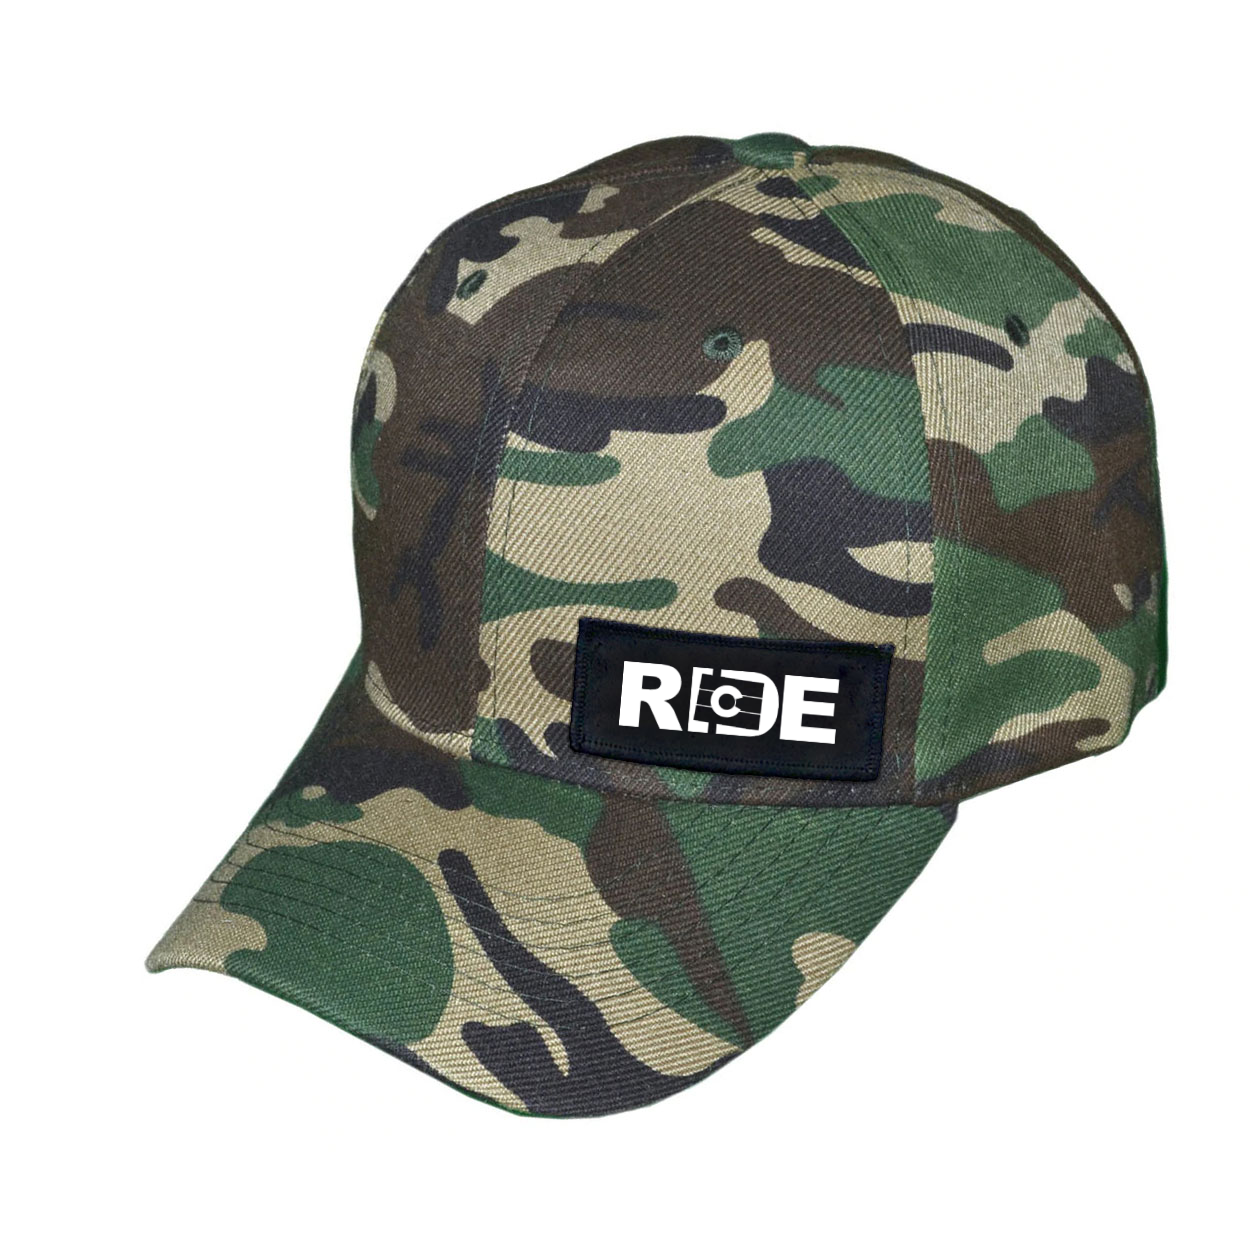 Ride Colorado Night Out Woven Patch Velcro Trucker Hat Camo